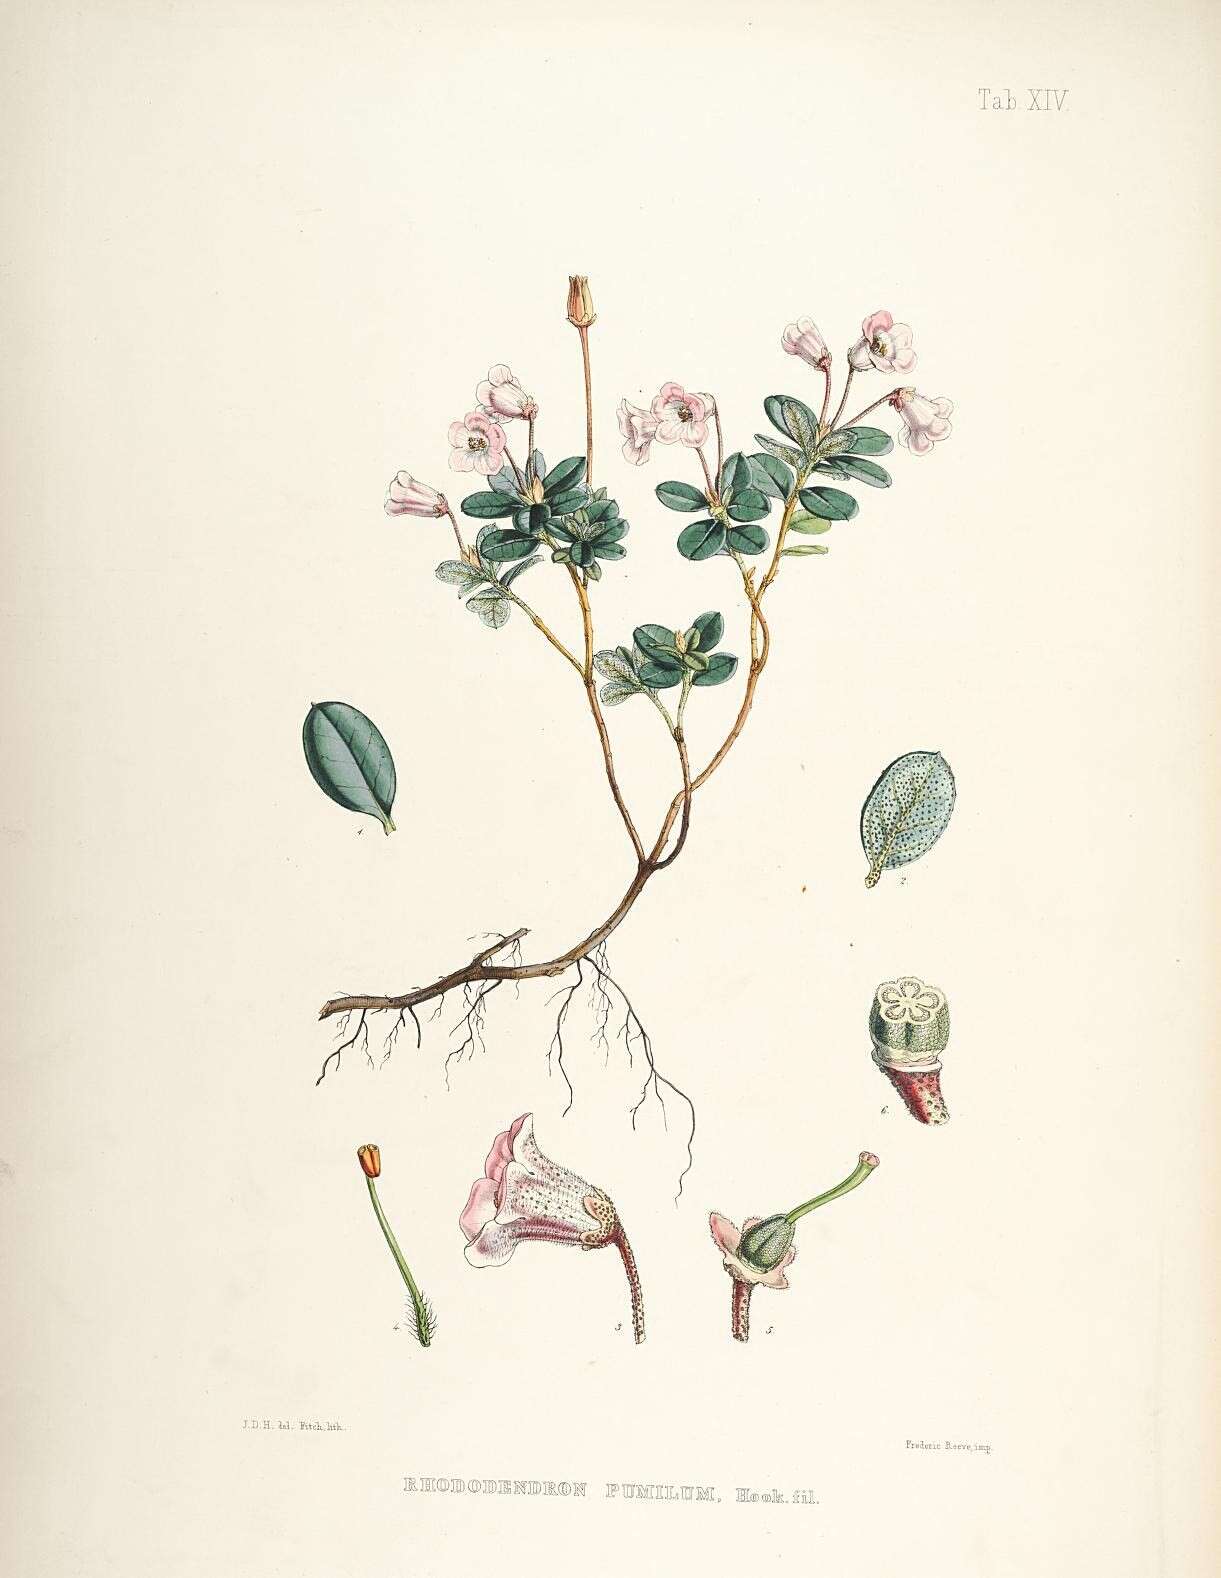 Image of Rhododendron pumilum Hook. fil.